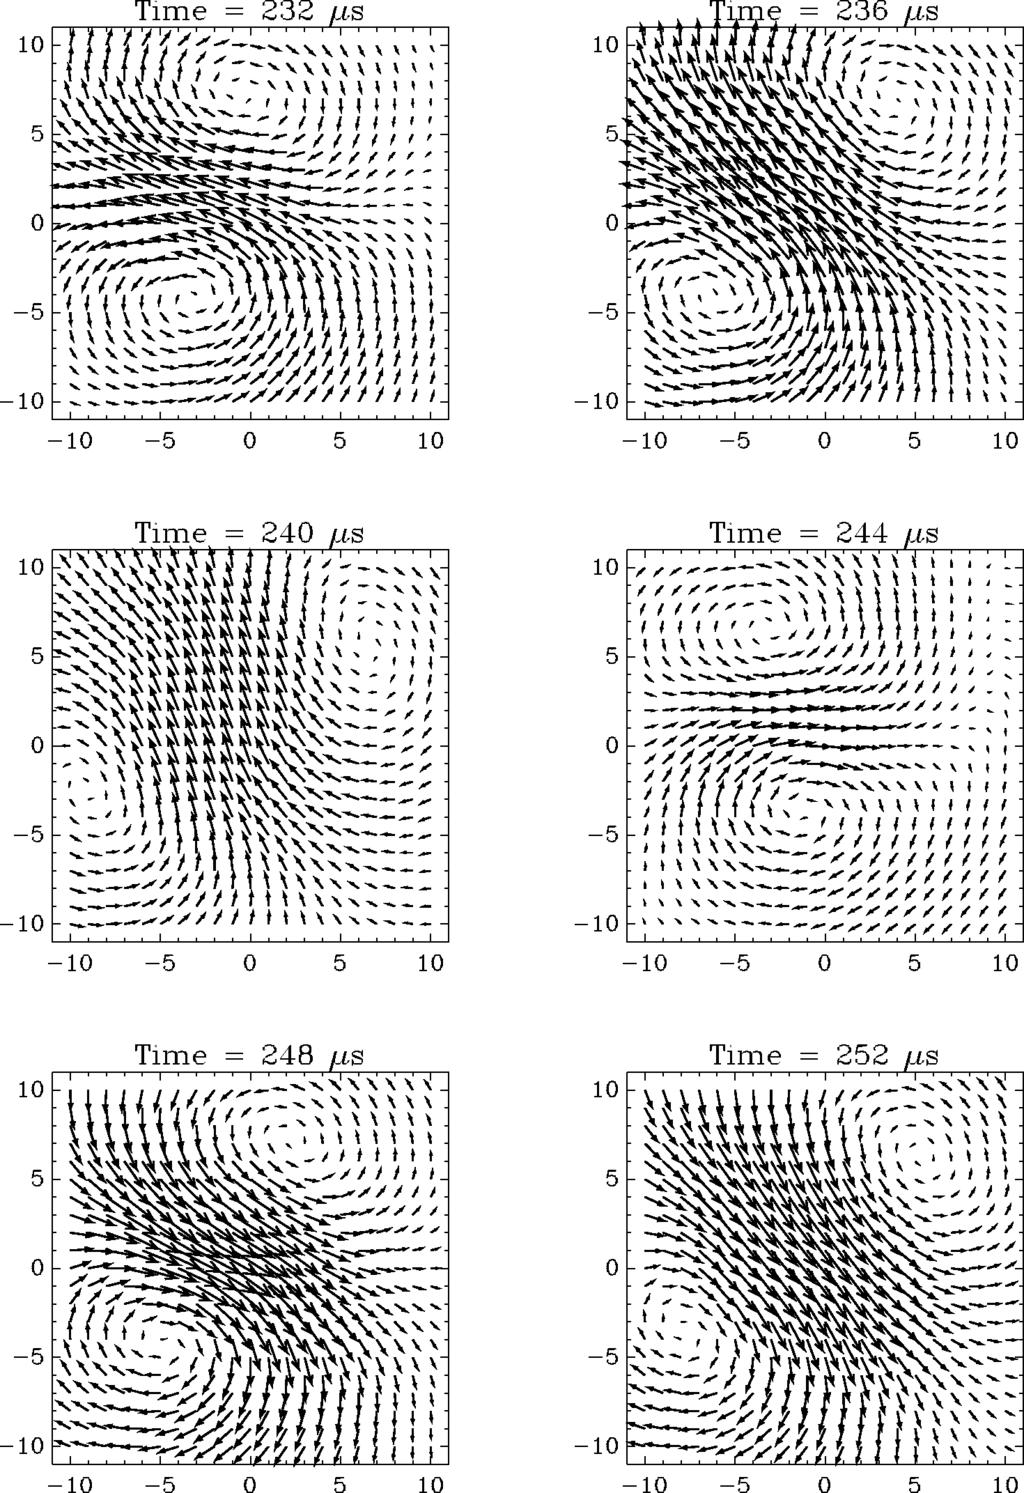 072102-6 Palmer, Gekelman, and Vincena Phys. Plasmas 12, 072102 2005 FIG. 6. A time series showing B wave at 4 s intervals on a single measurement plane plane 2. The full wave period is 28 s.